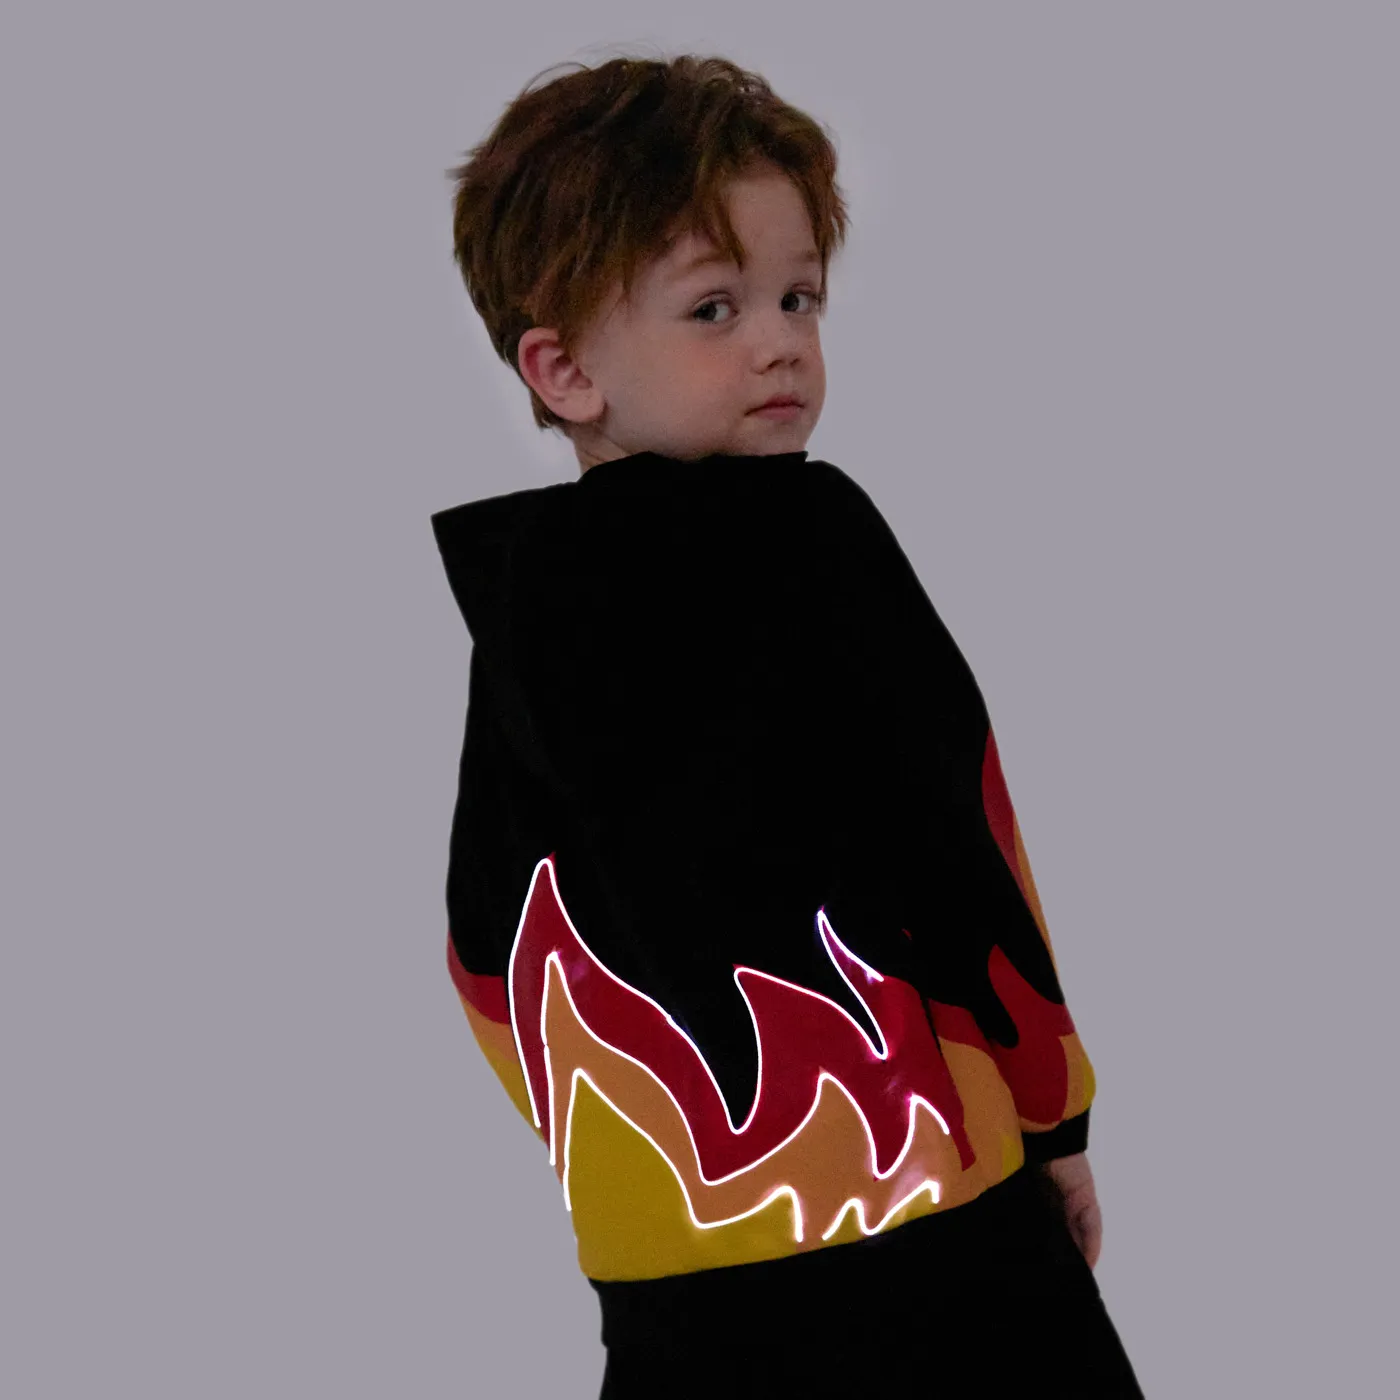 Go-Glow Illuminating Jacket With Light Up Flames Including Controller (Built-In Battery)